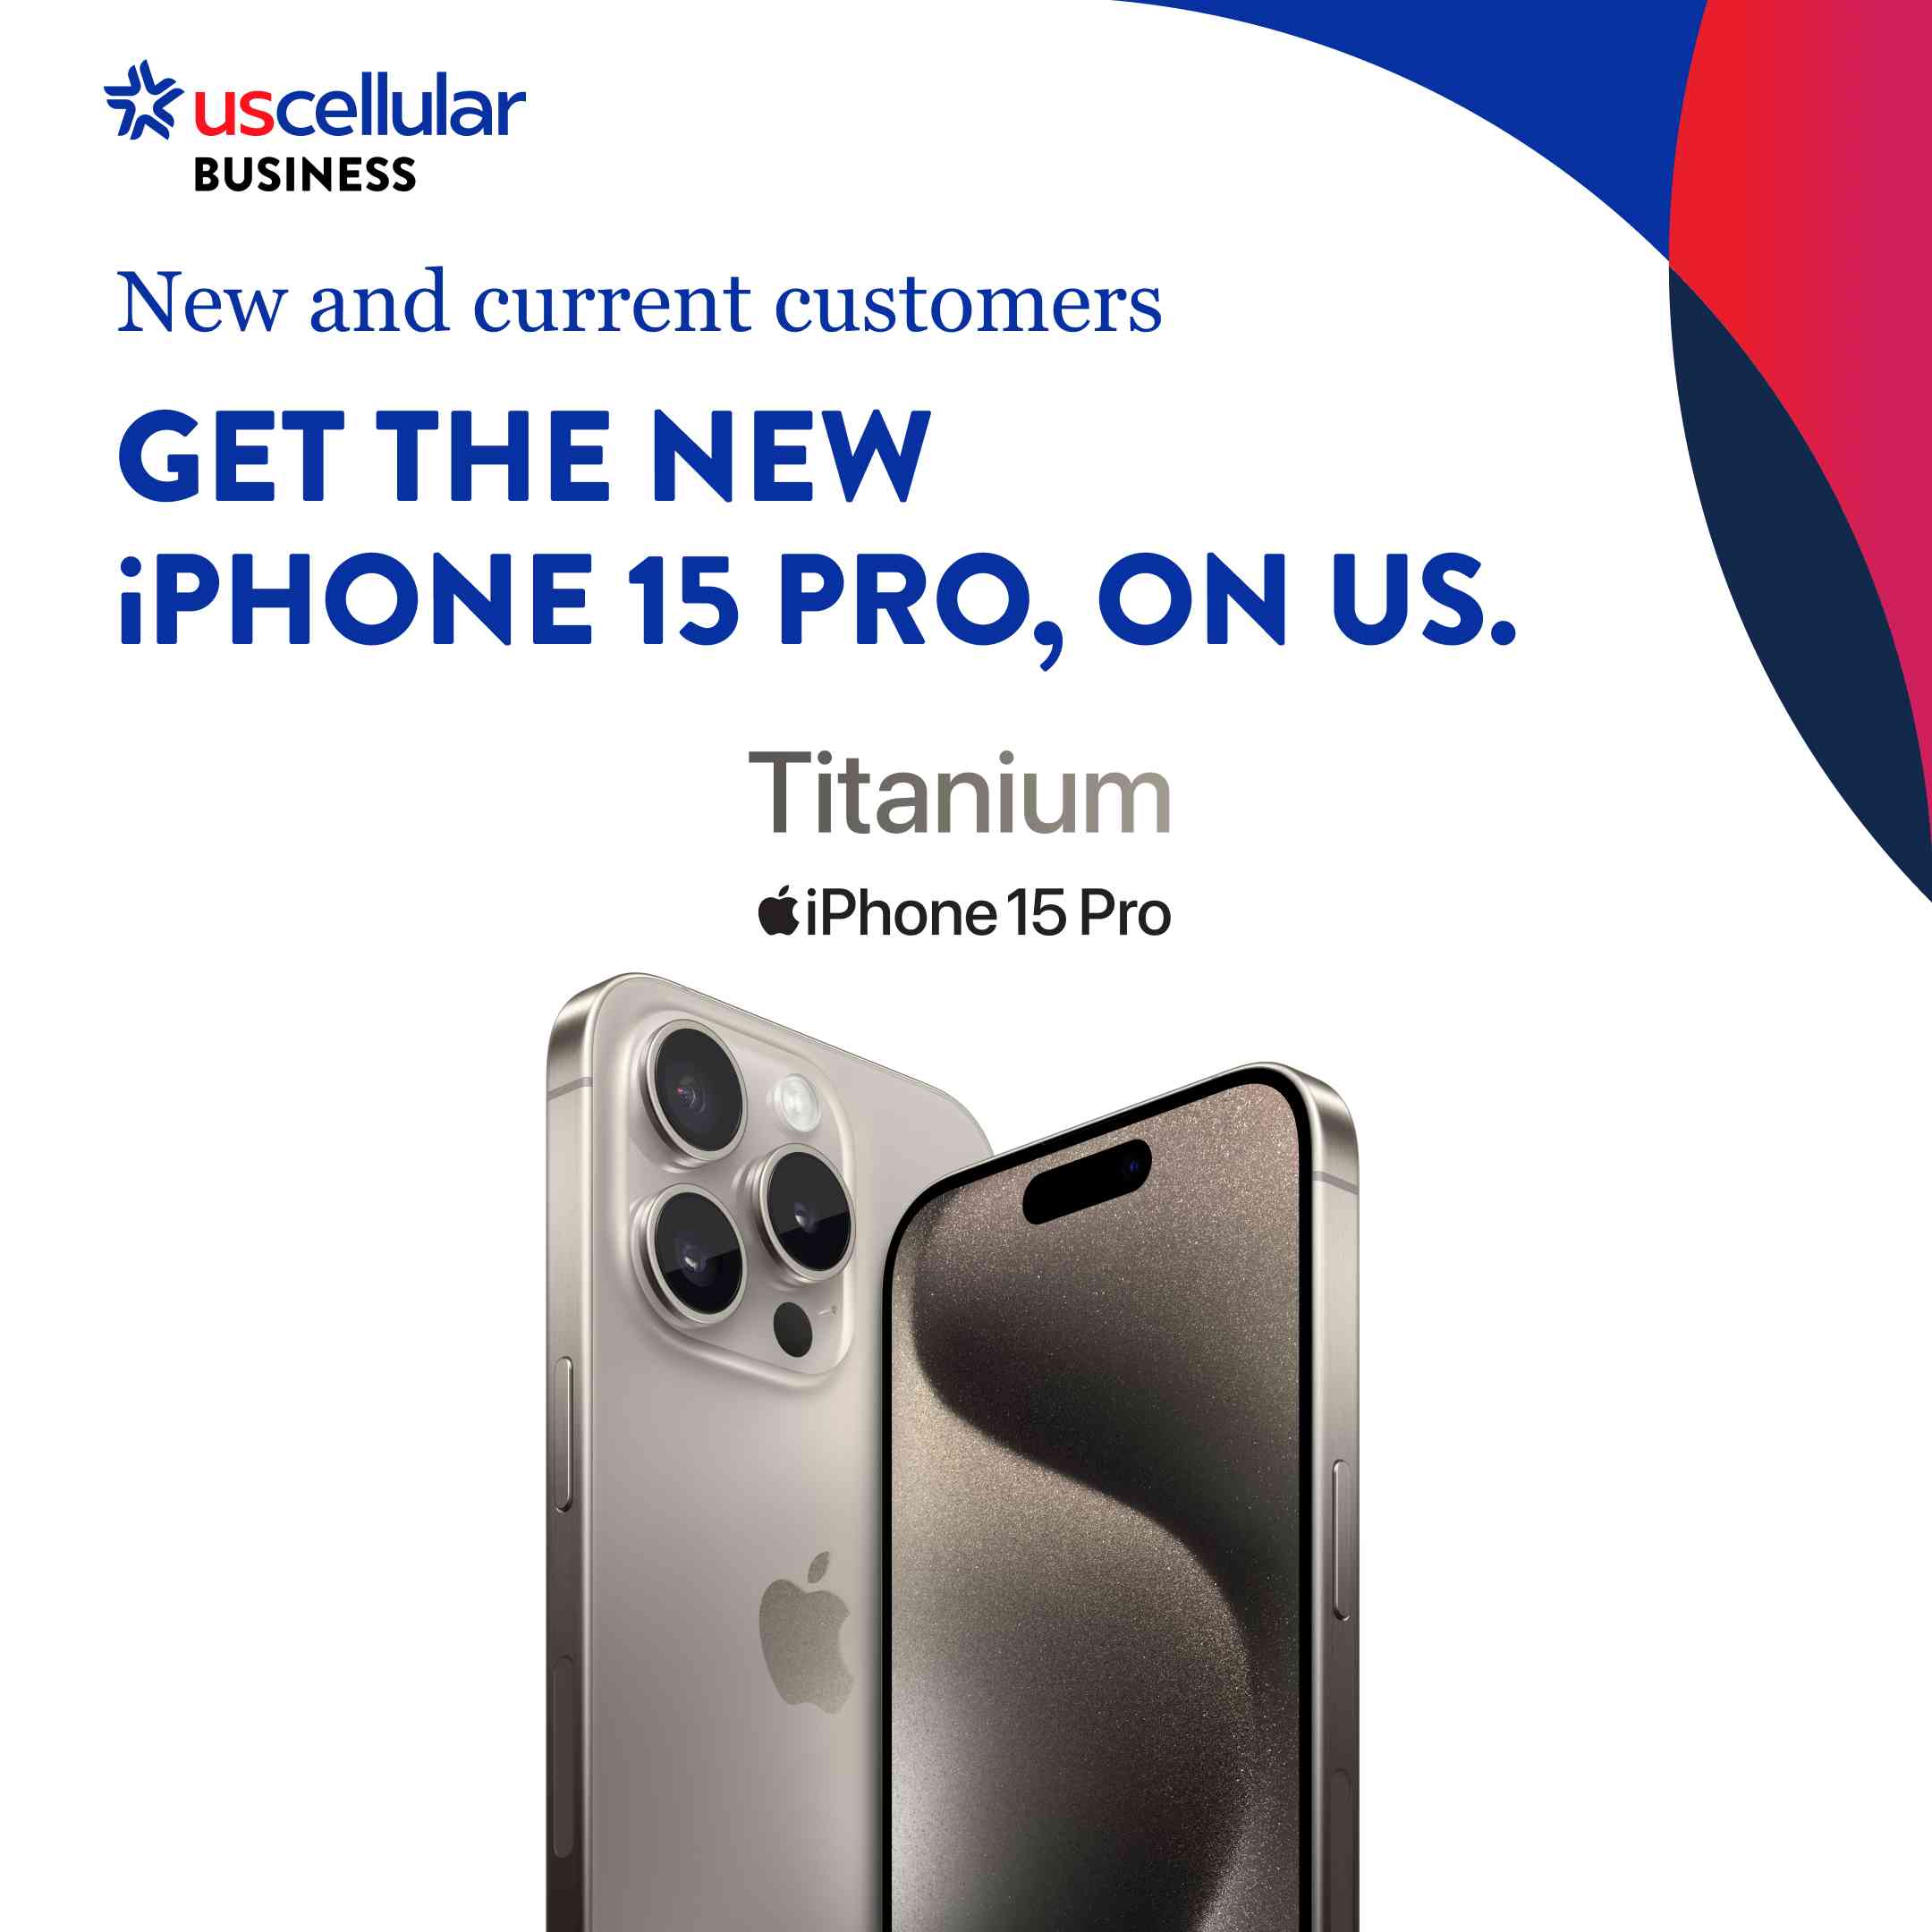 New and current customers GET THE NEW iPHONE 15 PRO, ON US. Titanium iPhone 15 Pro. UScellular.